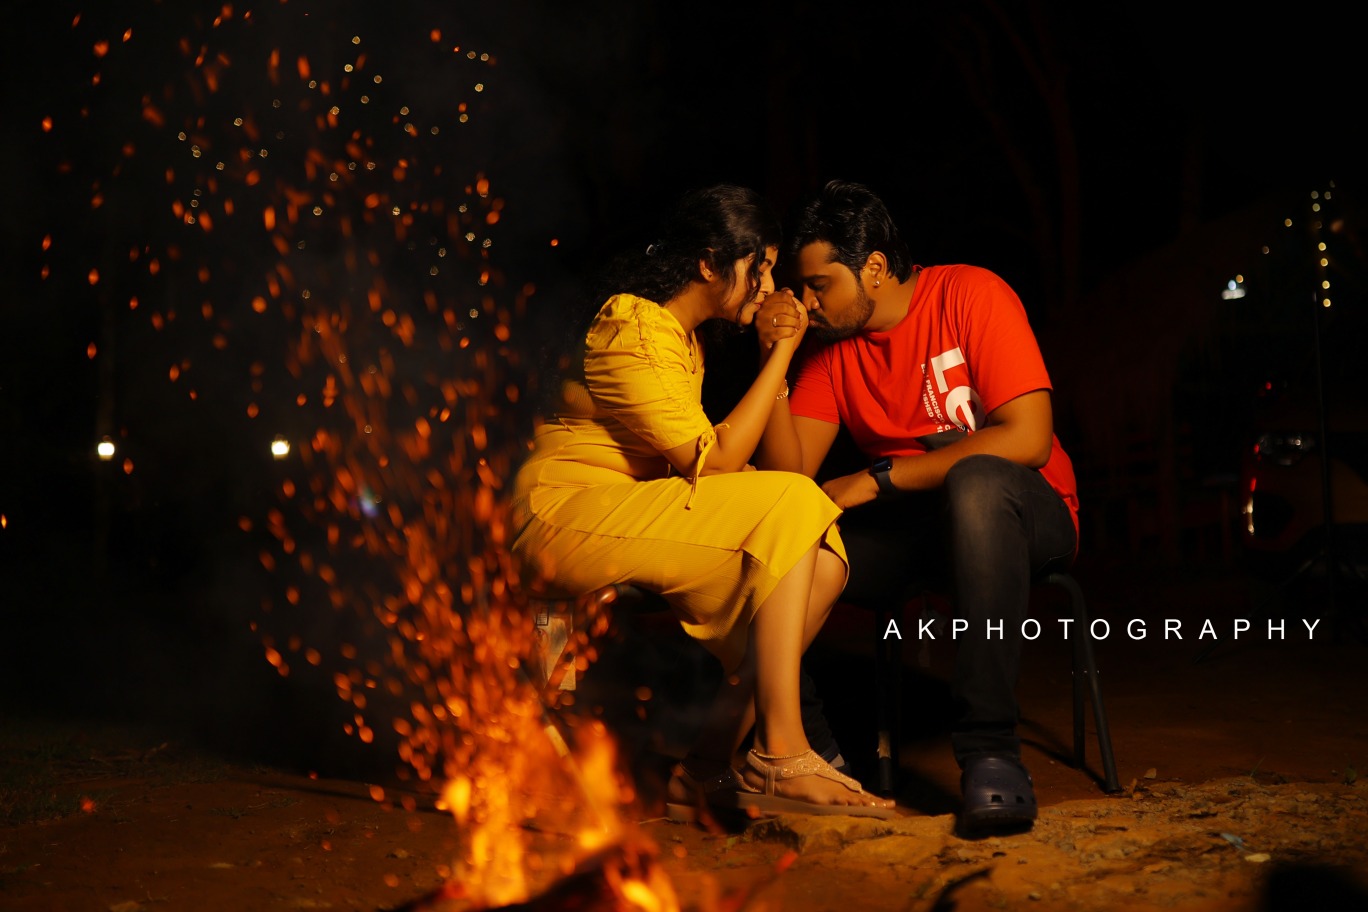 10 Romantic Pre-Wedding Photoshoot Poses to Capture Your Love Story